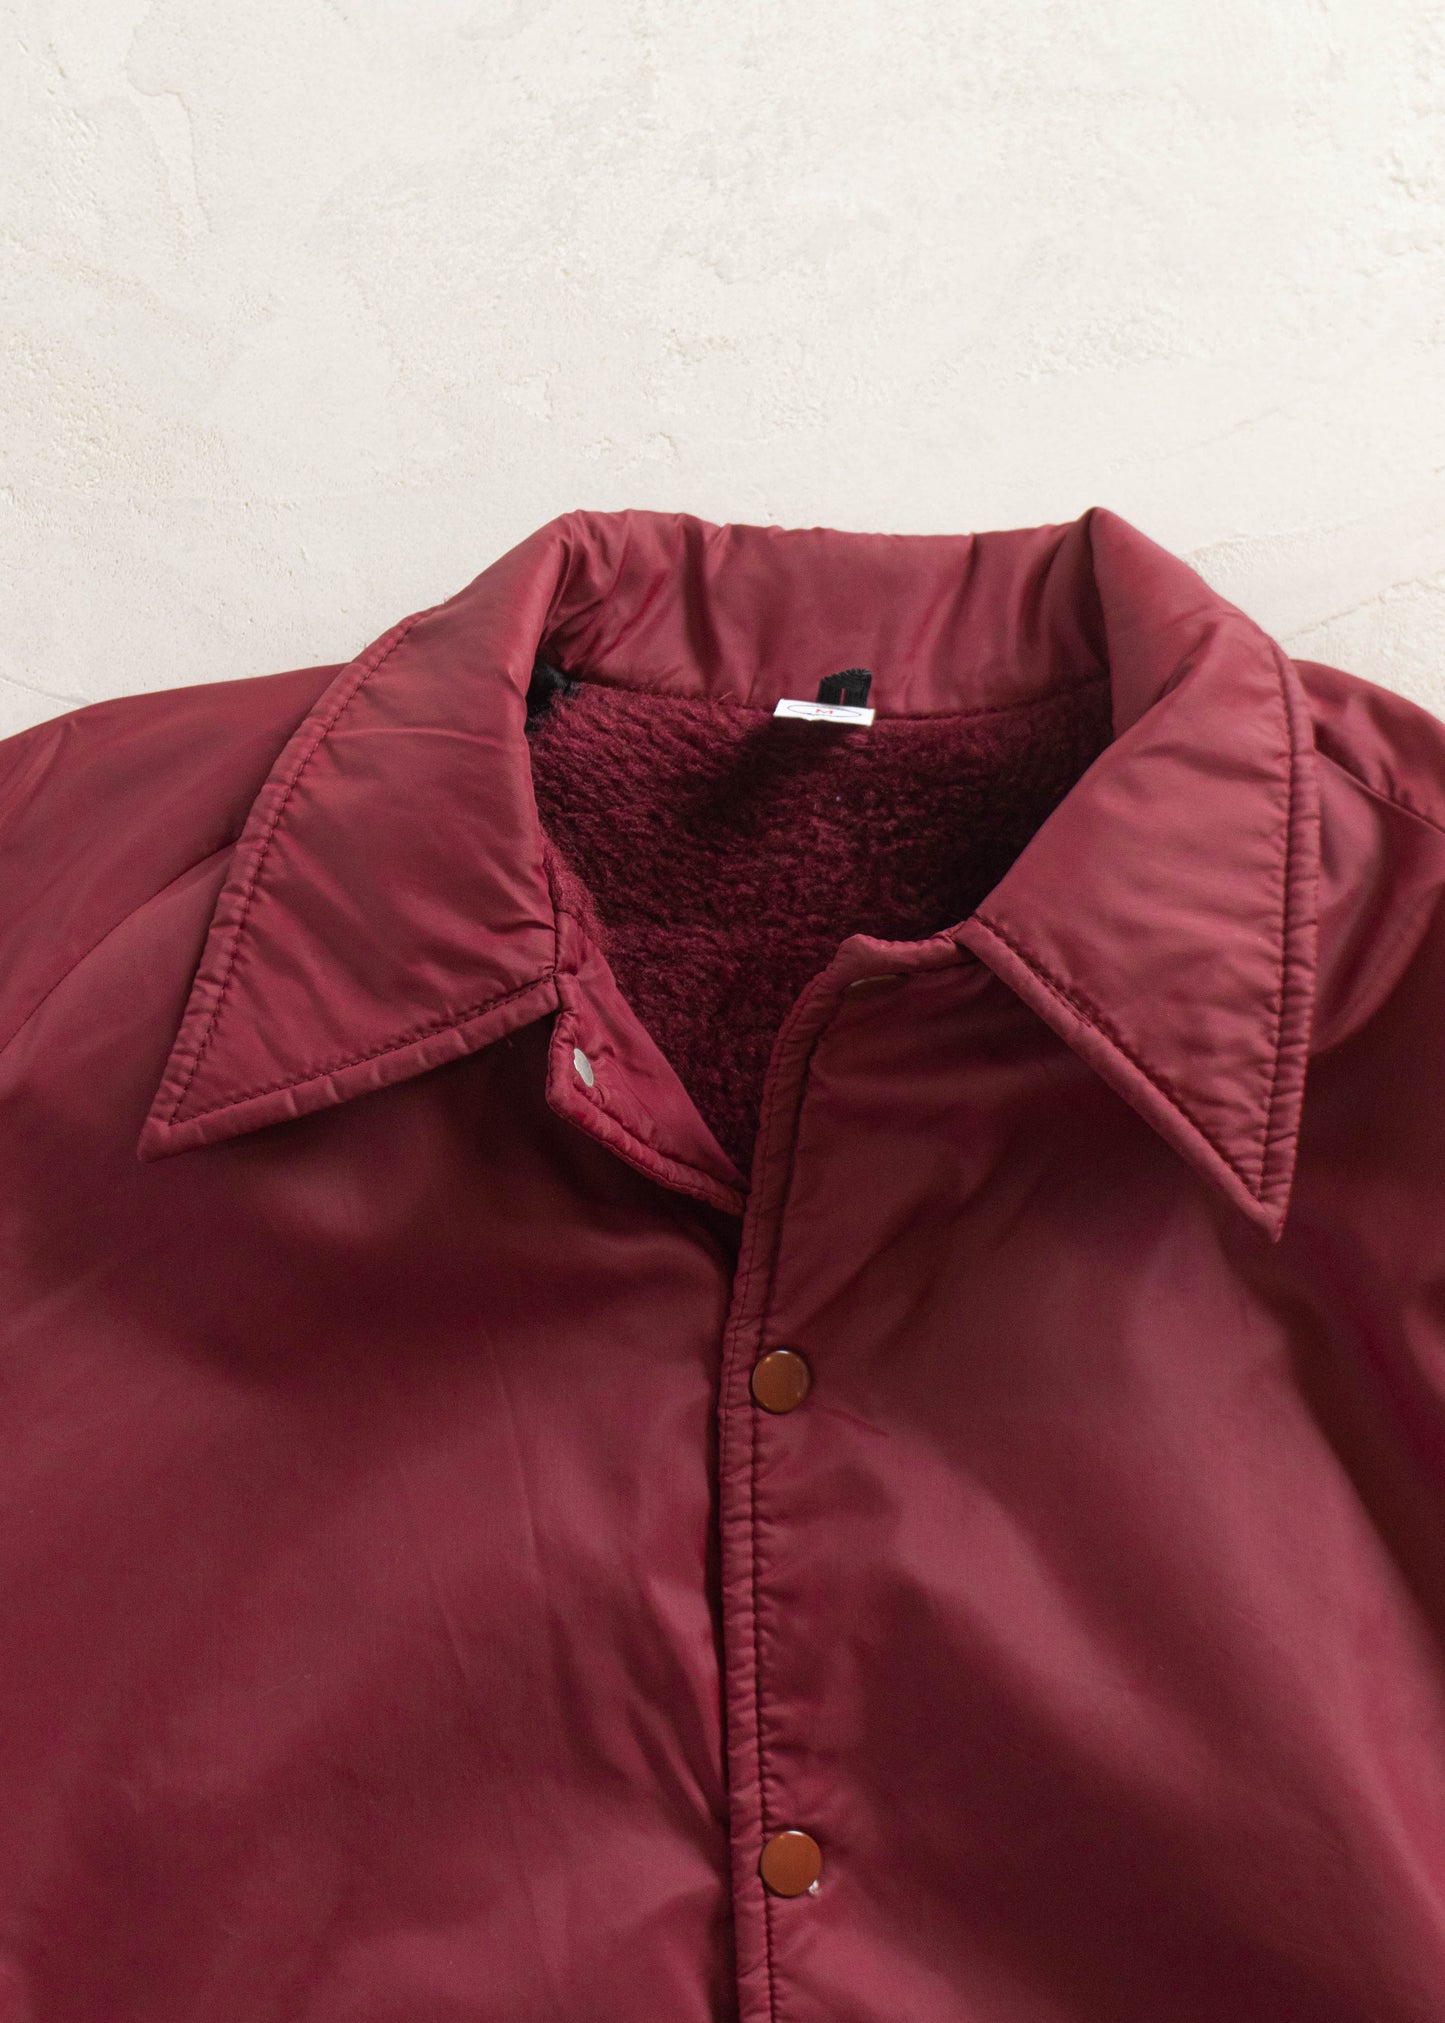 1980s Solid Burgundy Lined Nylon Jacket Size L/XL